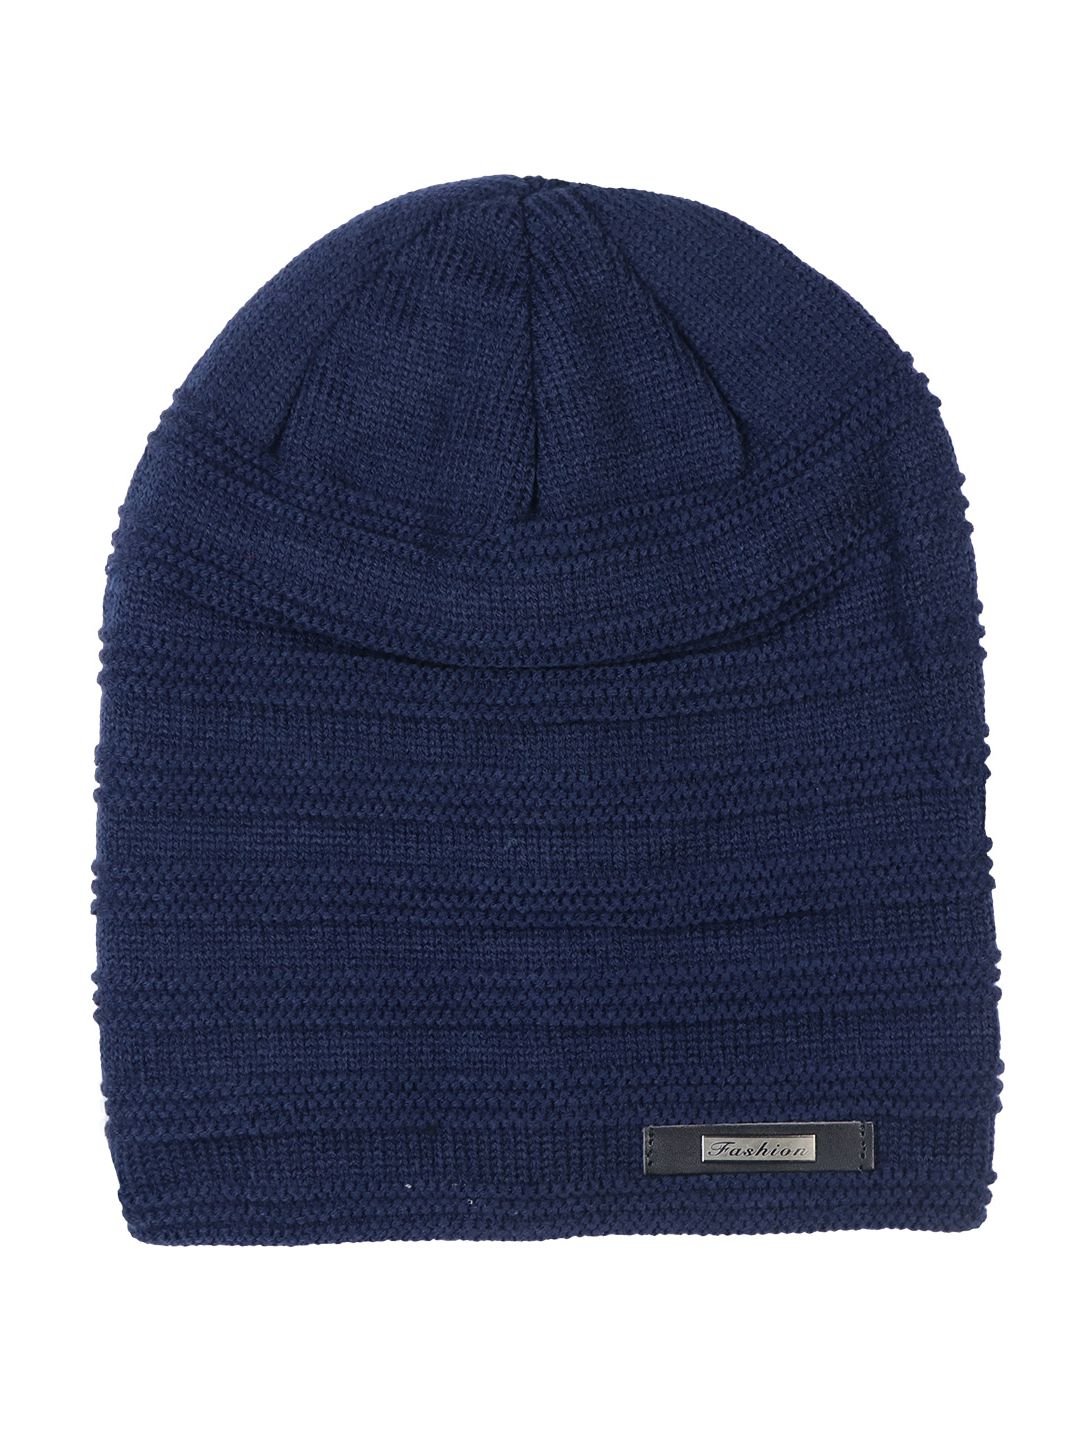 iSWEVEN Unisex Navy Blue Woolen Beanie Cap Price in India